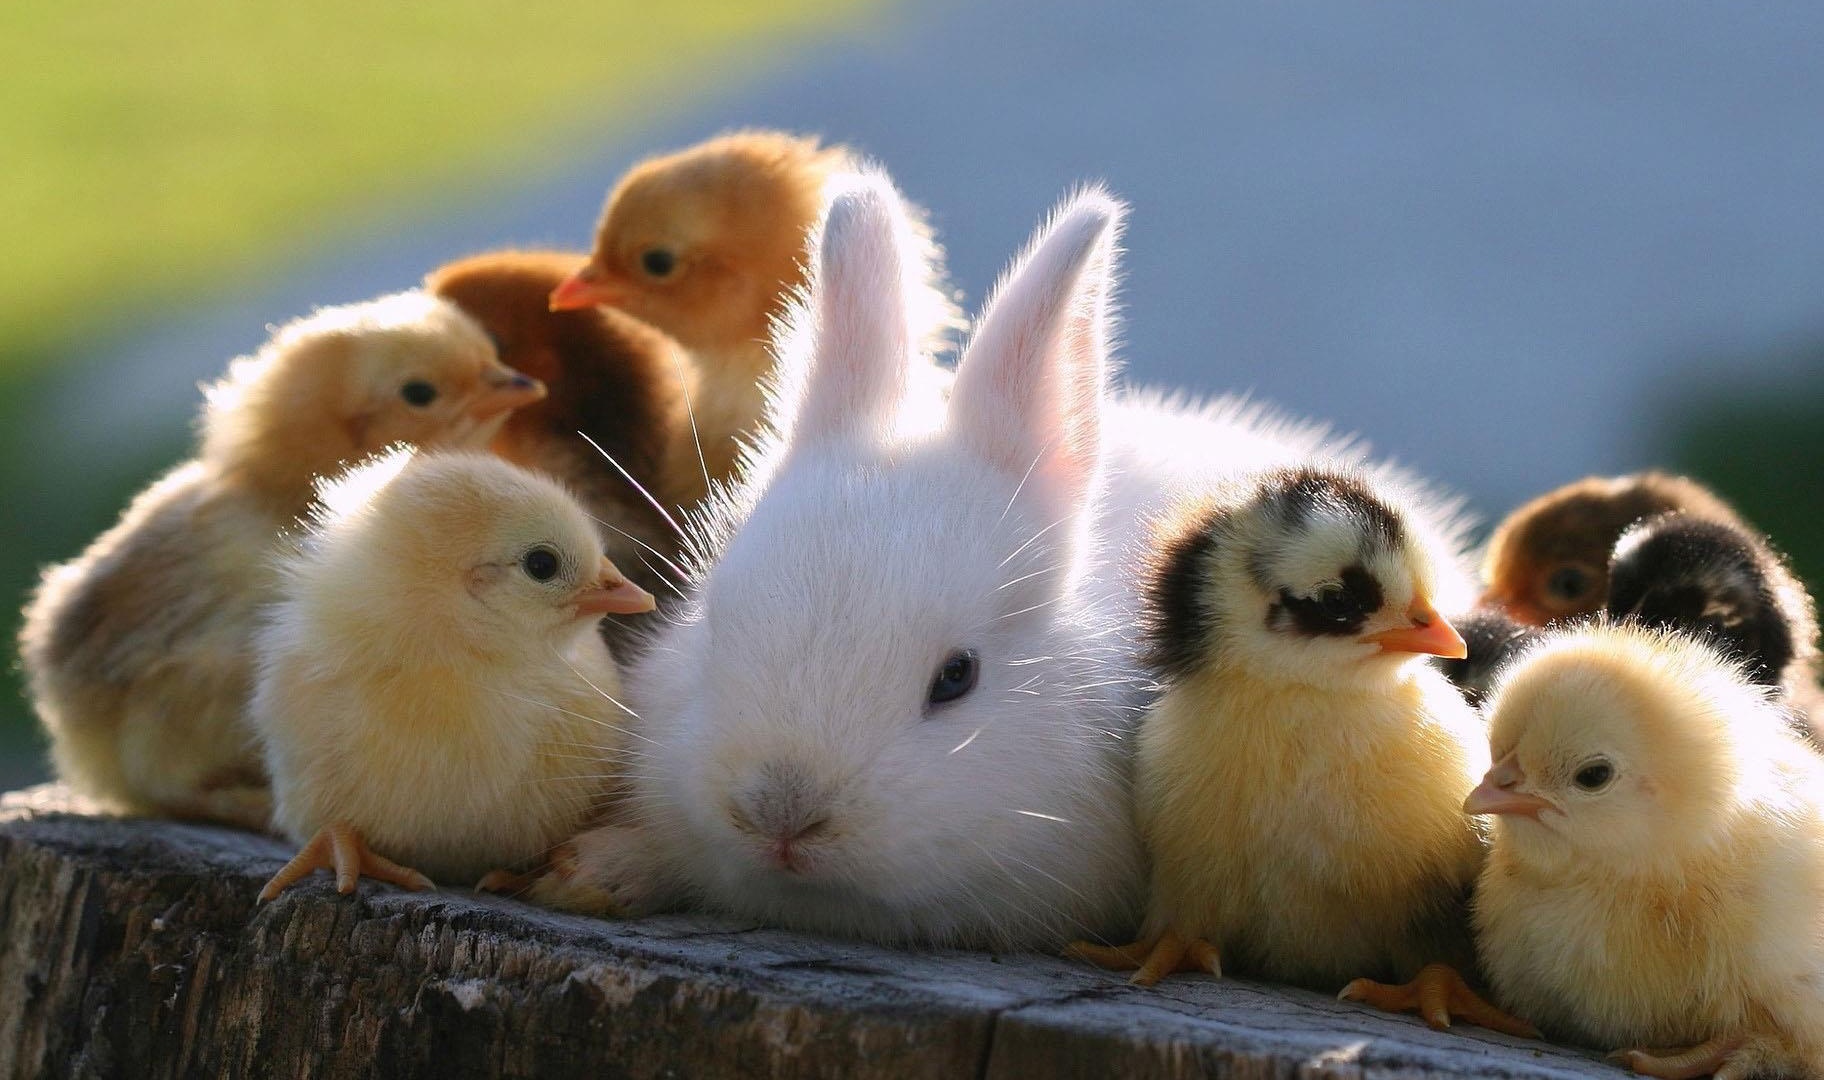 Baby Chicken And Bunny - HD Wallpaper 